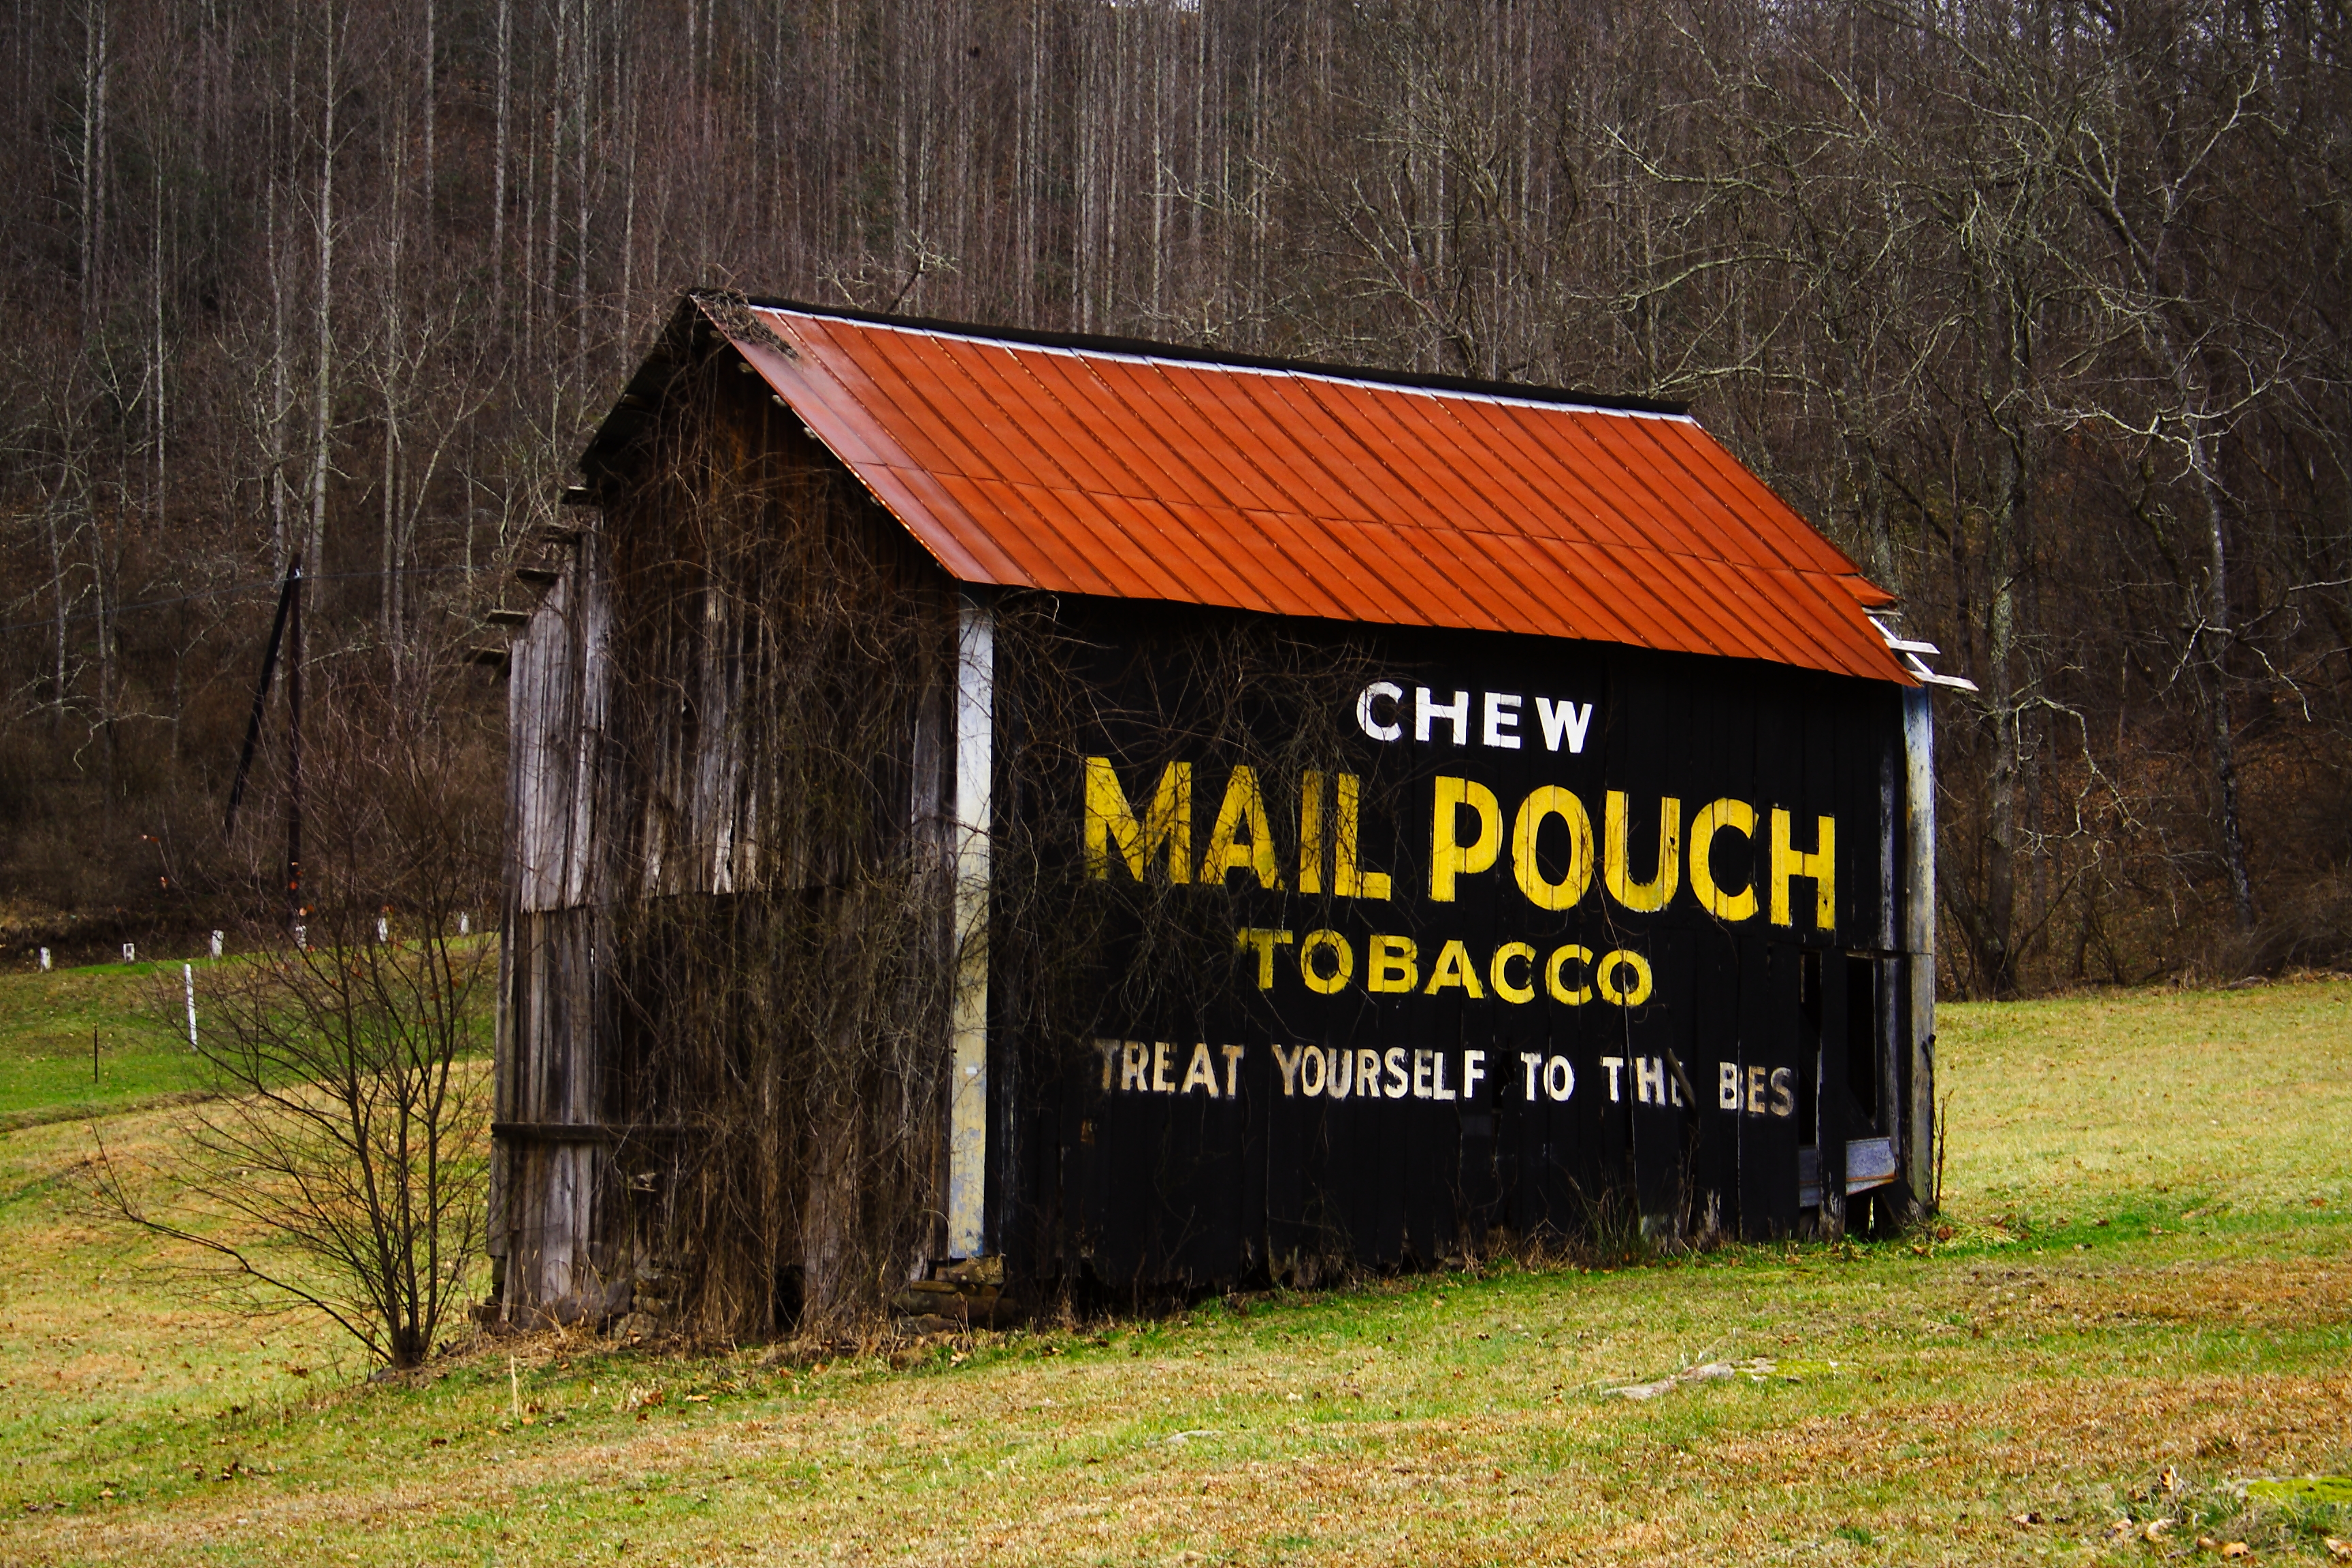 Winter Mail Pouch Barn Structures Nature Pictures By